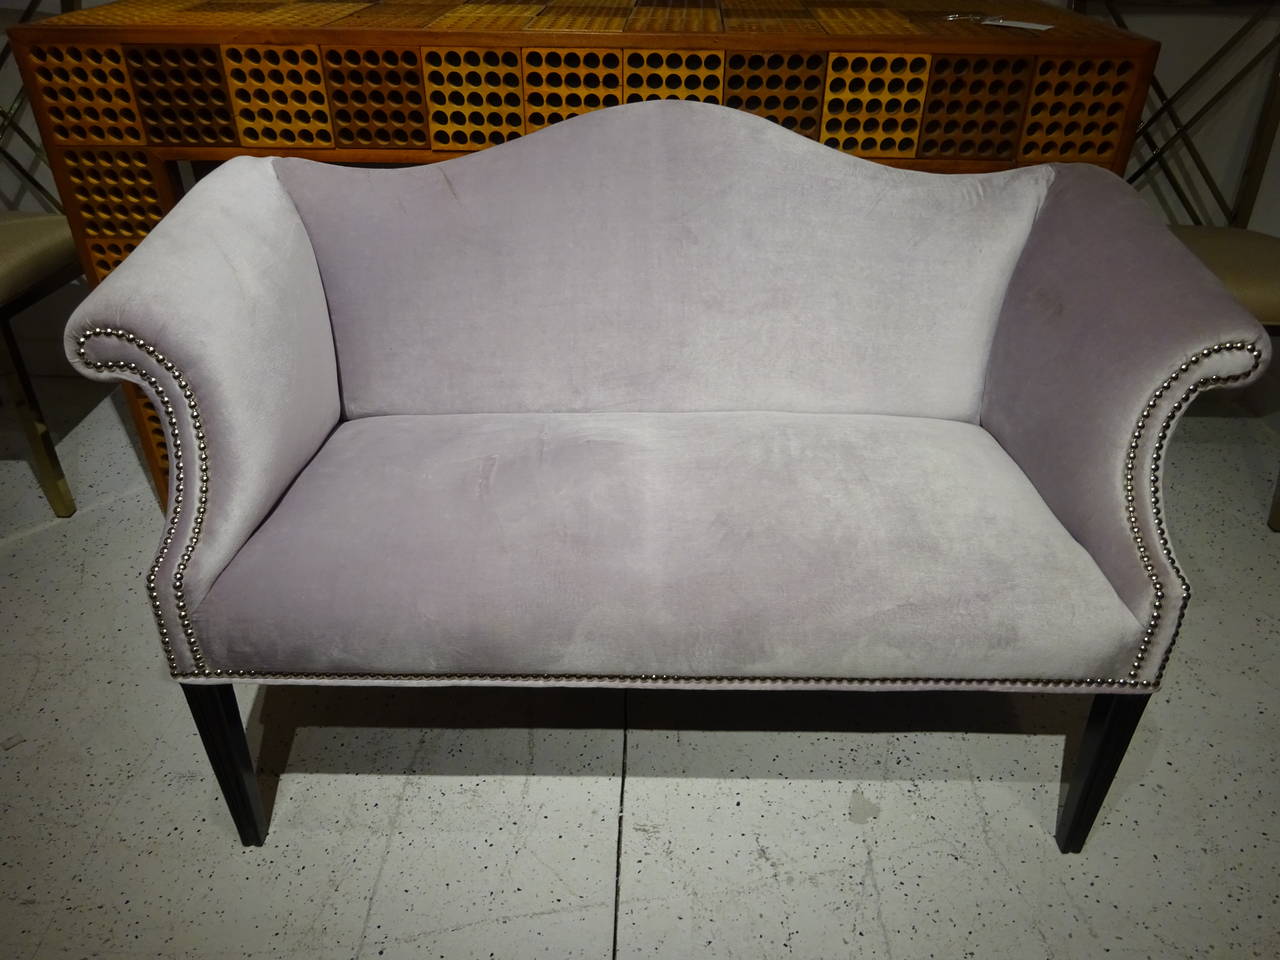 Diminutive Ultrasuede Settee with Polished Nickel Nailheads, raised on four ebonized tapering legs,